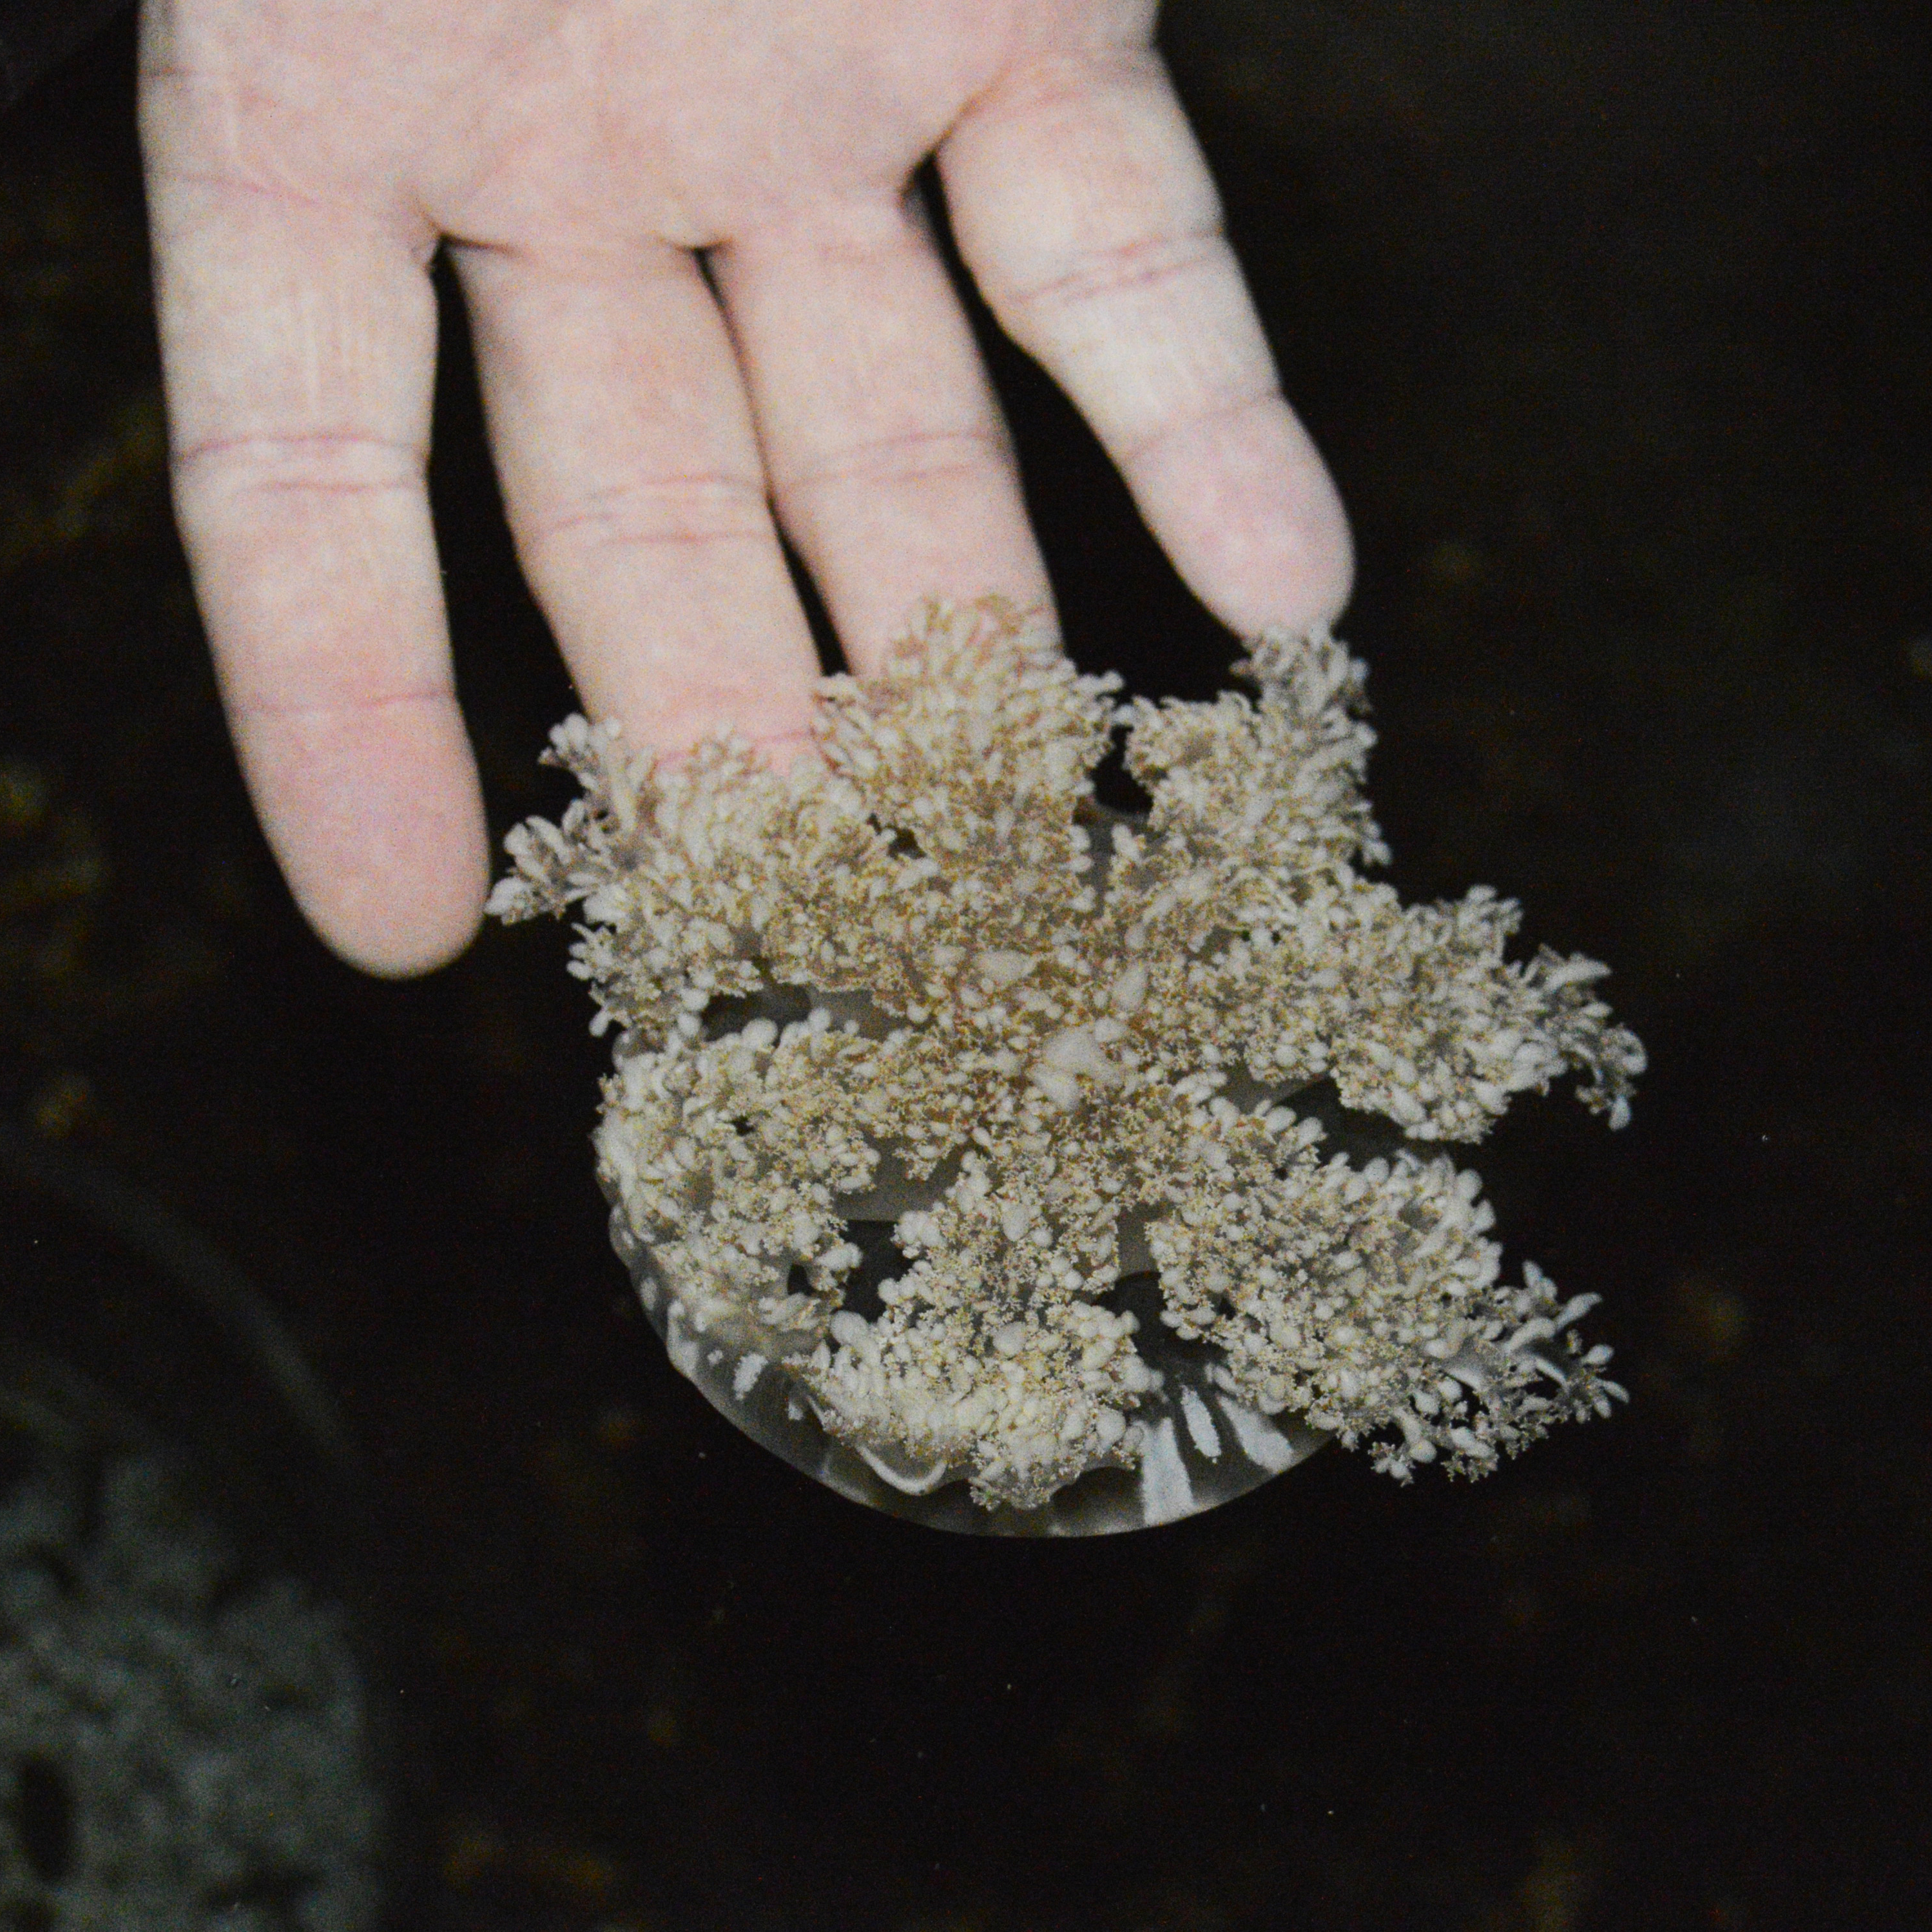 Martindale Lab Publishes Paper in Journal of Experimental Marine Biology